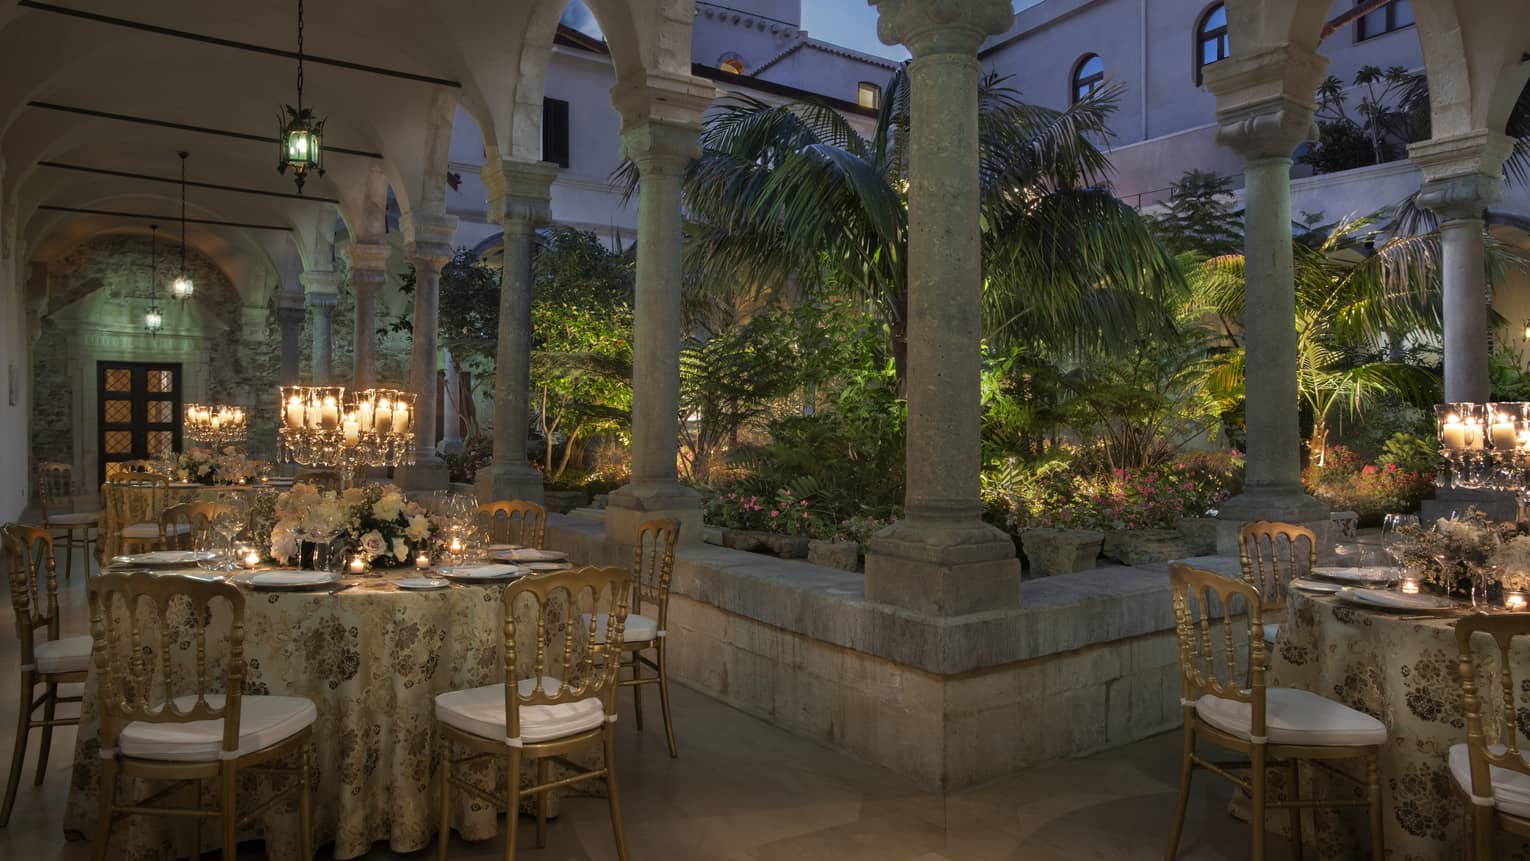 Ancient Cloister outdoor venue with elegant table settings under stone archway at dusk